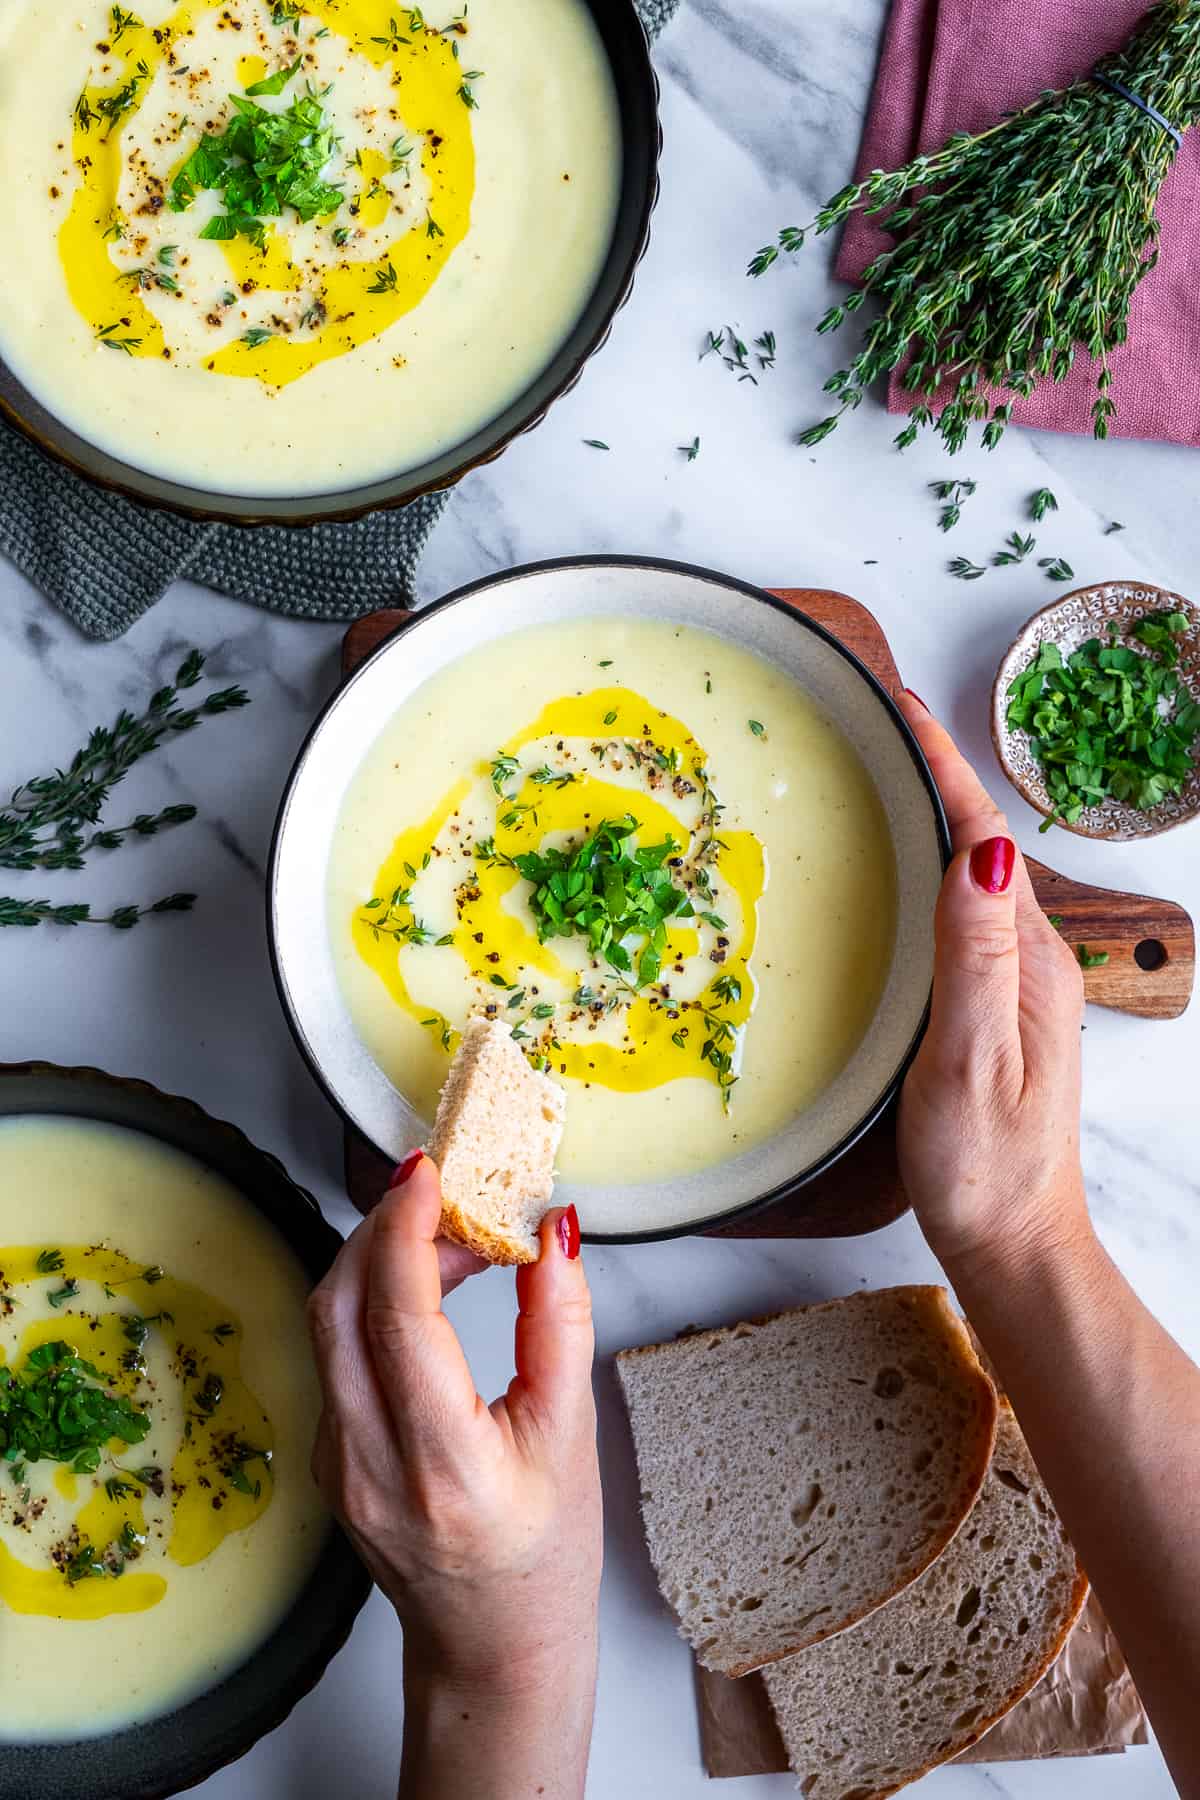 Woman about to dip a piece of bread into celeriac soup in a bowl, more soup bowls, fresh parsley and thyme on the side.